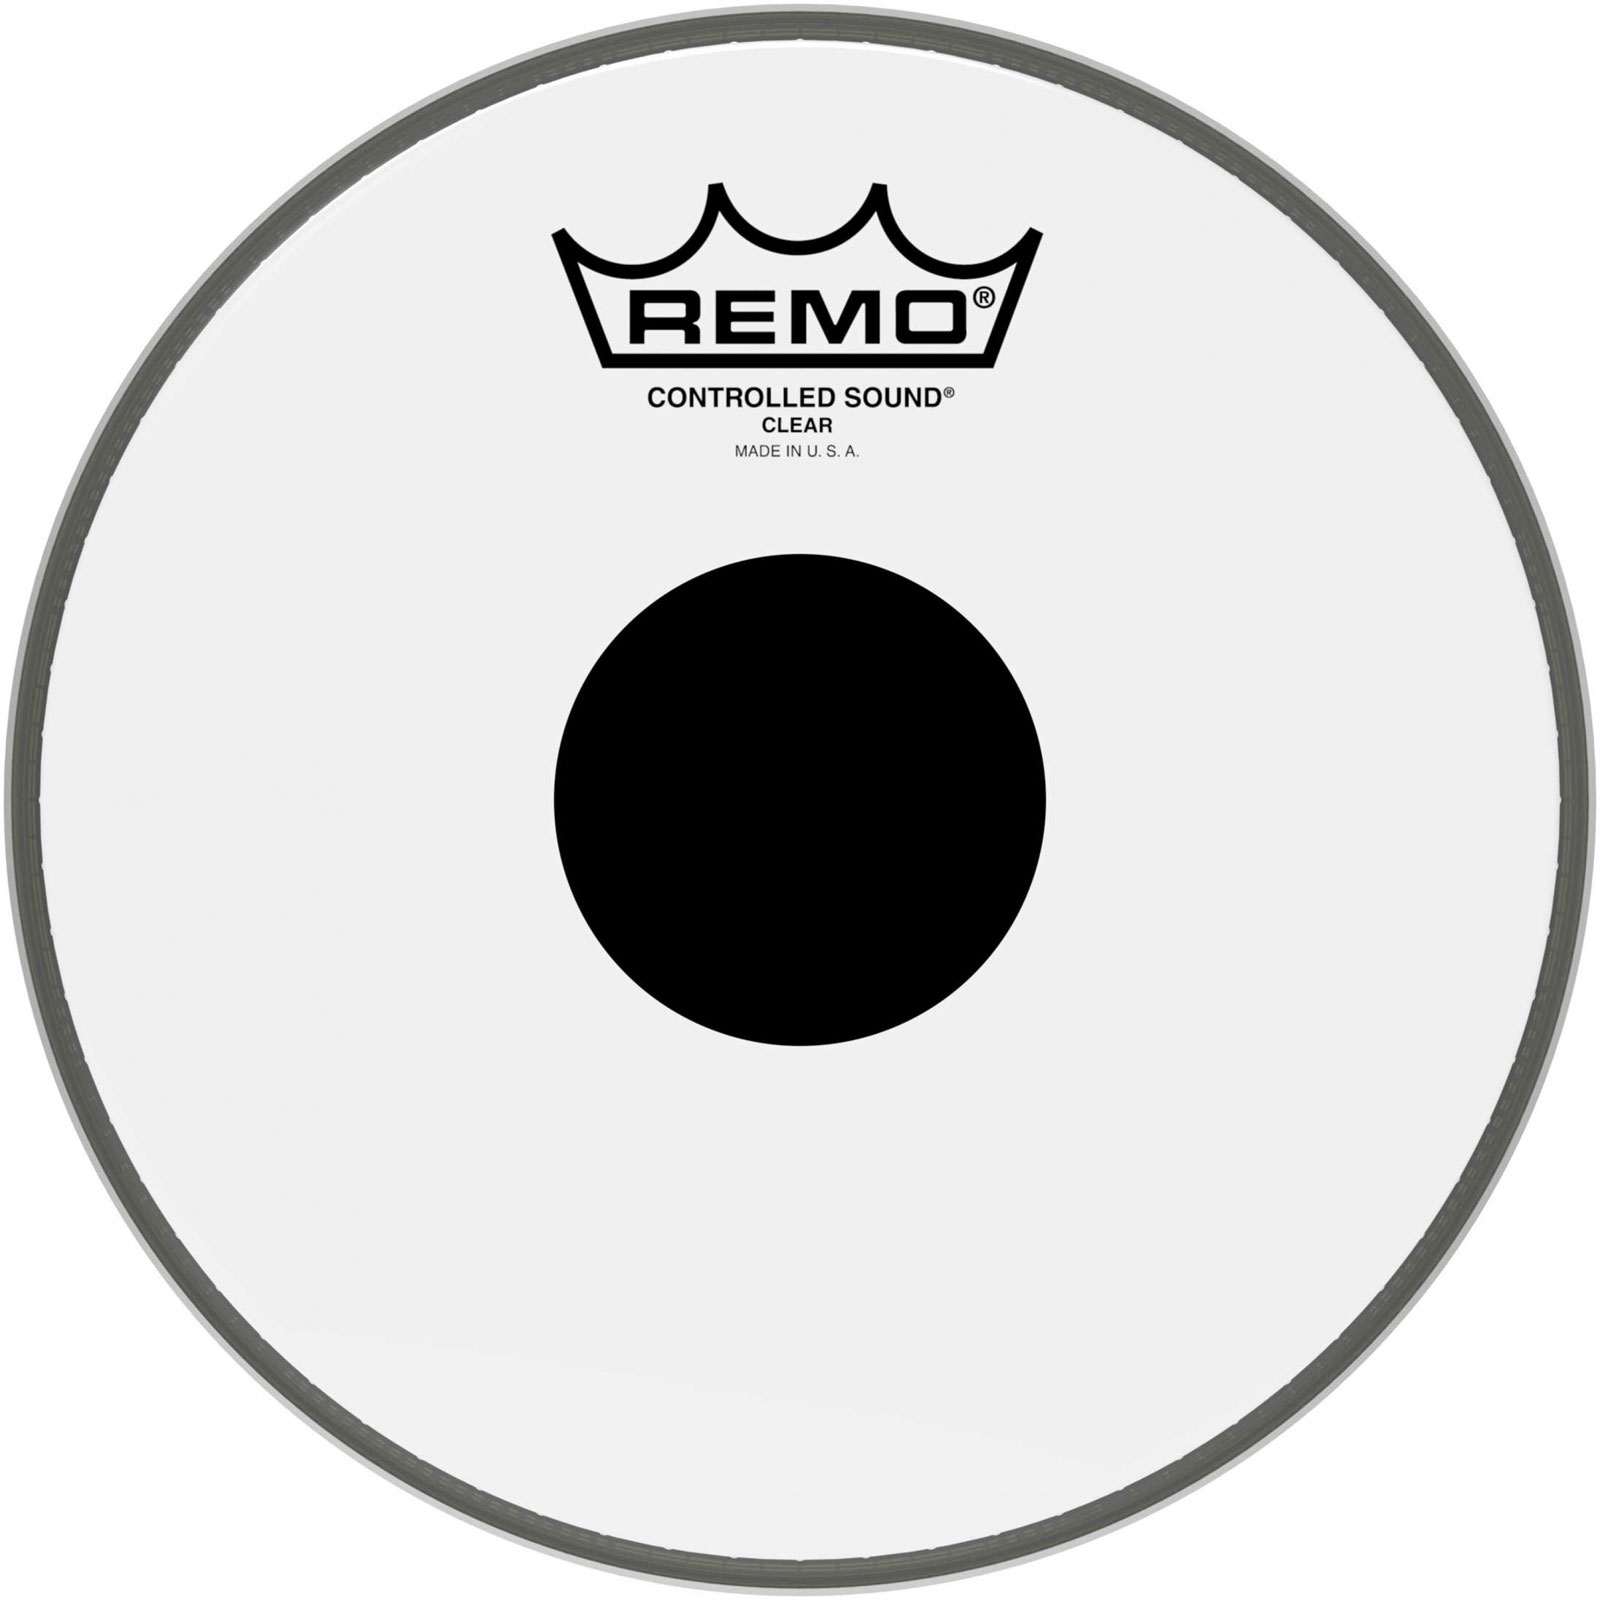 REMO CONTROLLED SOUND 8 - CLEAR - CS-0308-10